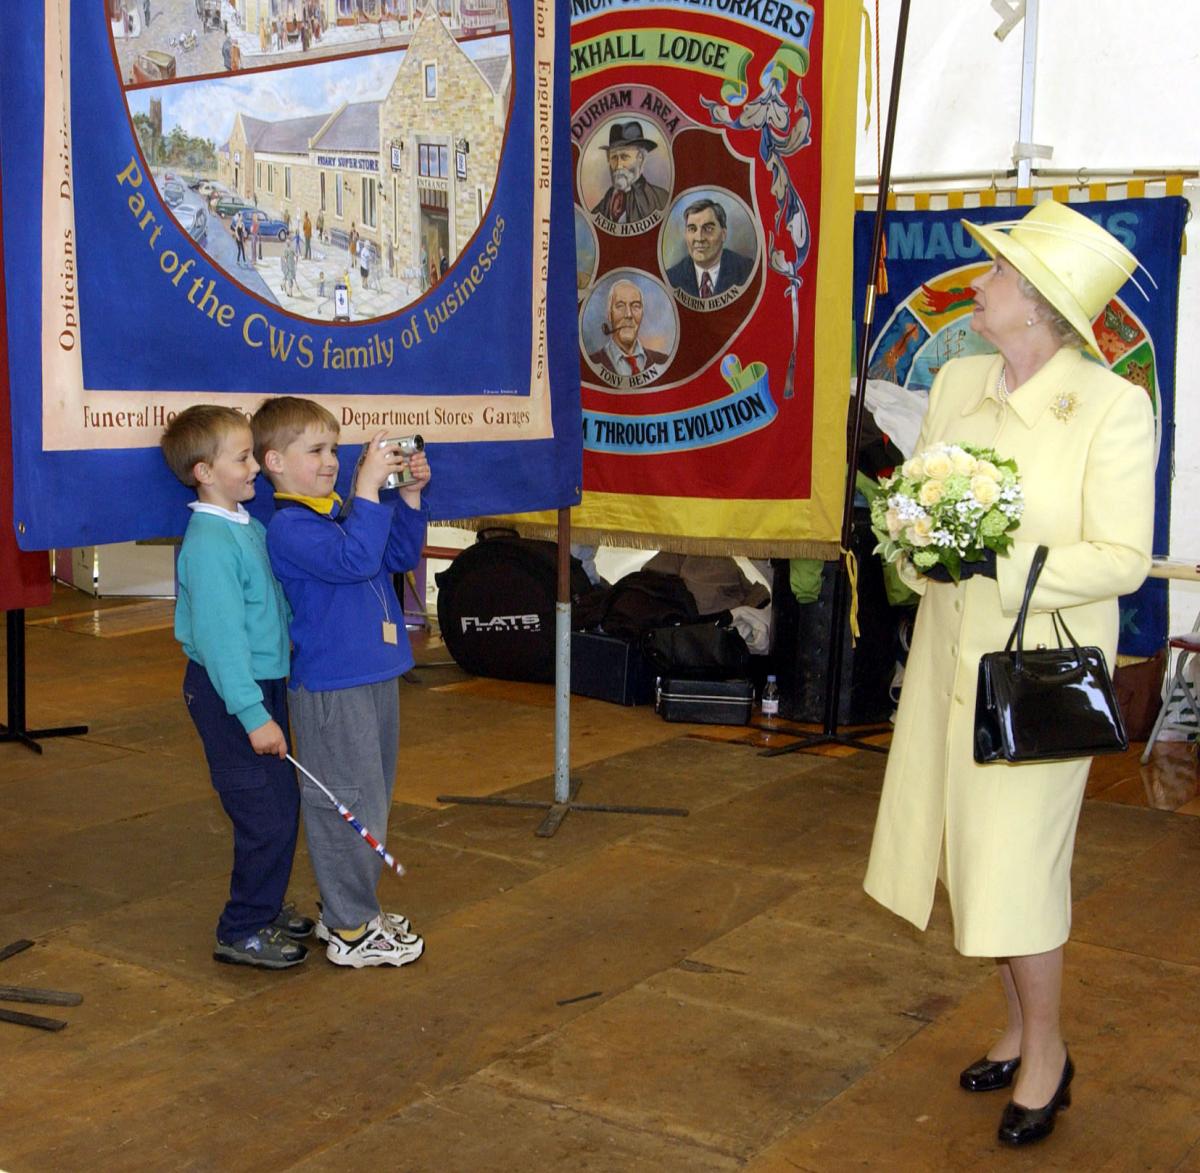 The Queen, Elizabeth II, is filmed by two young admirers while looking at Trade Union banners at Easington, County Durham on the second day of her visit to the region during her Golden Jubilee tour of the nation